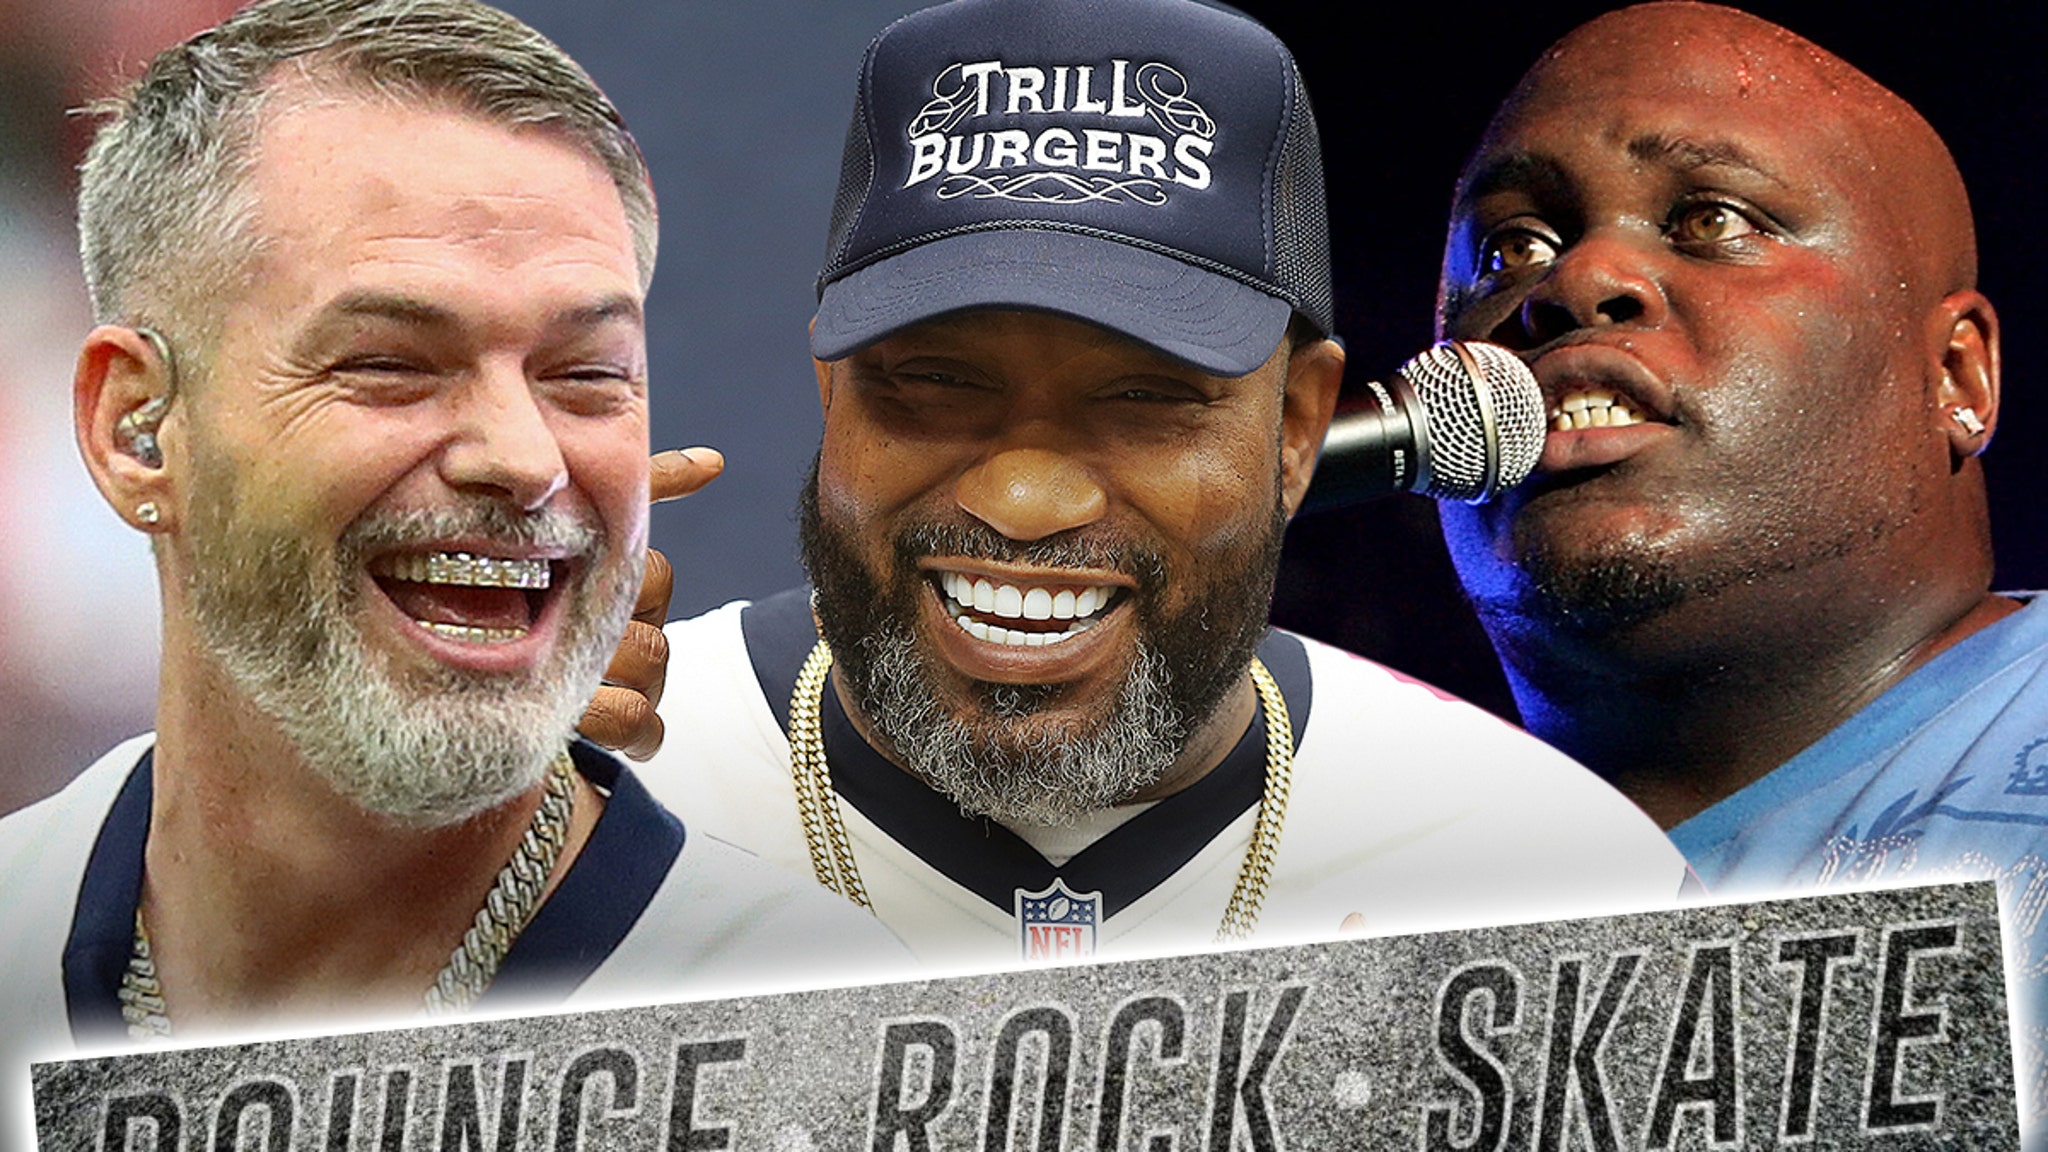 Paul Wall And Bun B Pay Respect To Houston Slab Riders On 'Bounce, Rock,  Skate